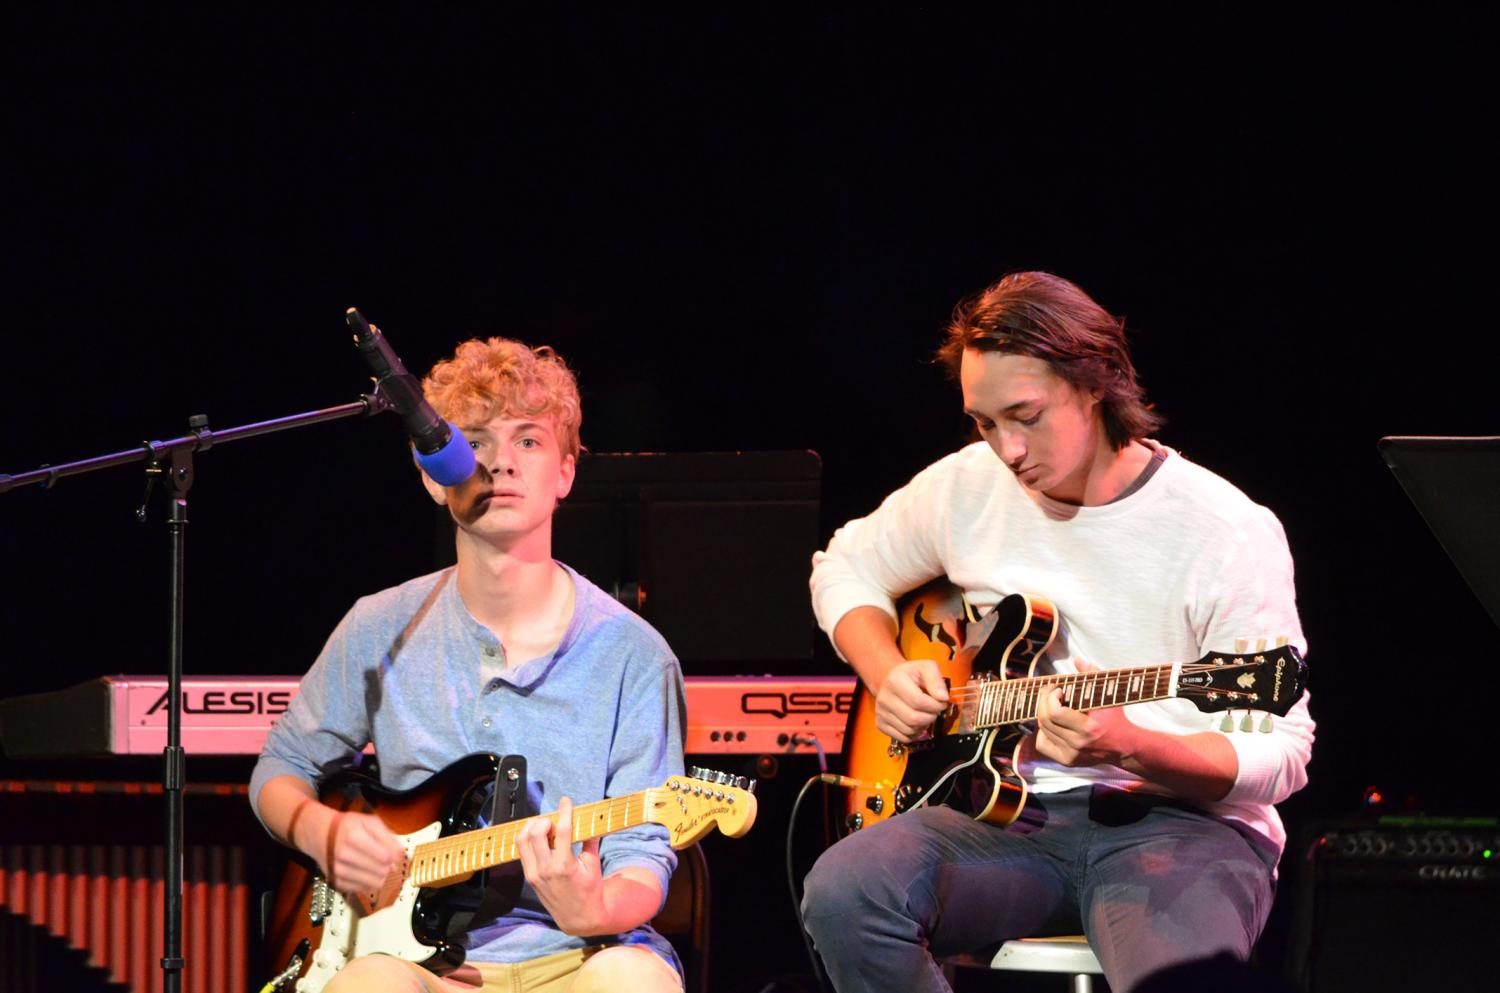 Seniors collaborated on many songs together taking advantage of their final performances to perform with friends.
Pictured above: Connor Wilke (left), and Jamie Leonard (right).